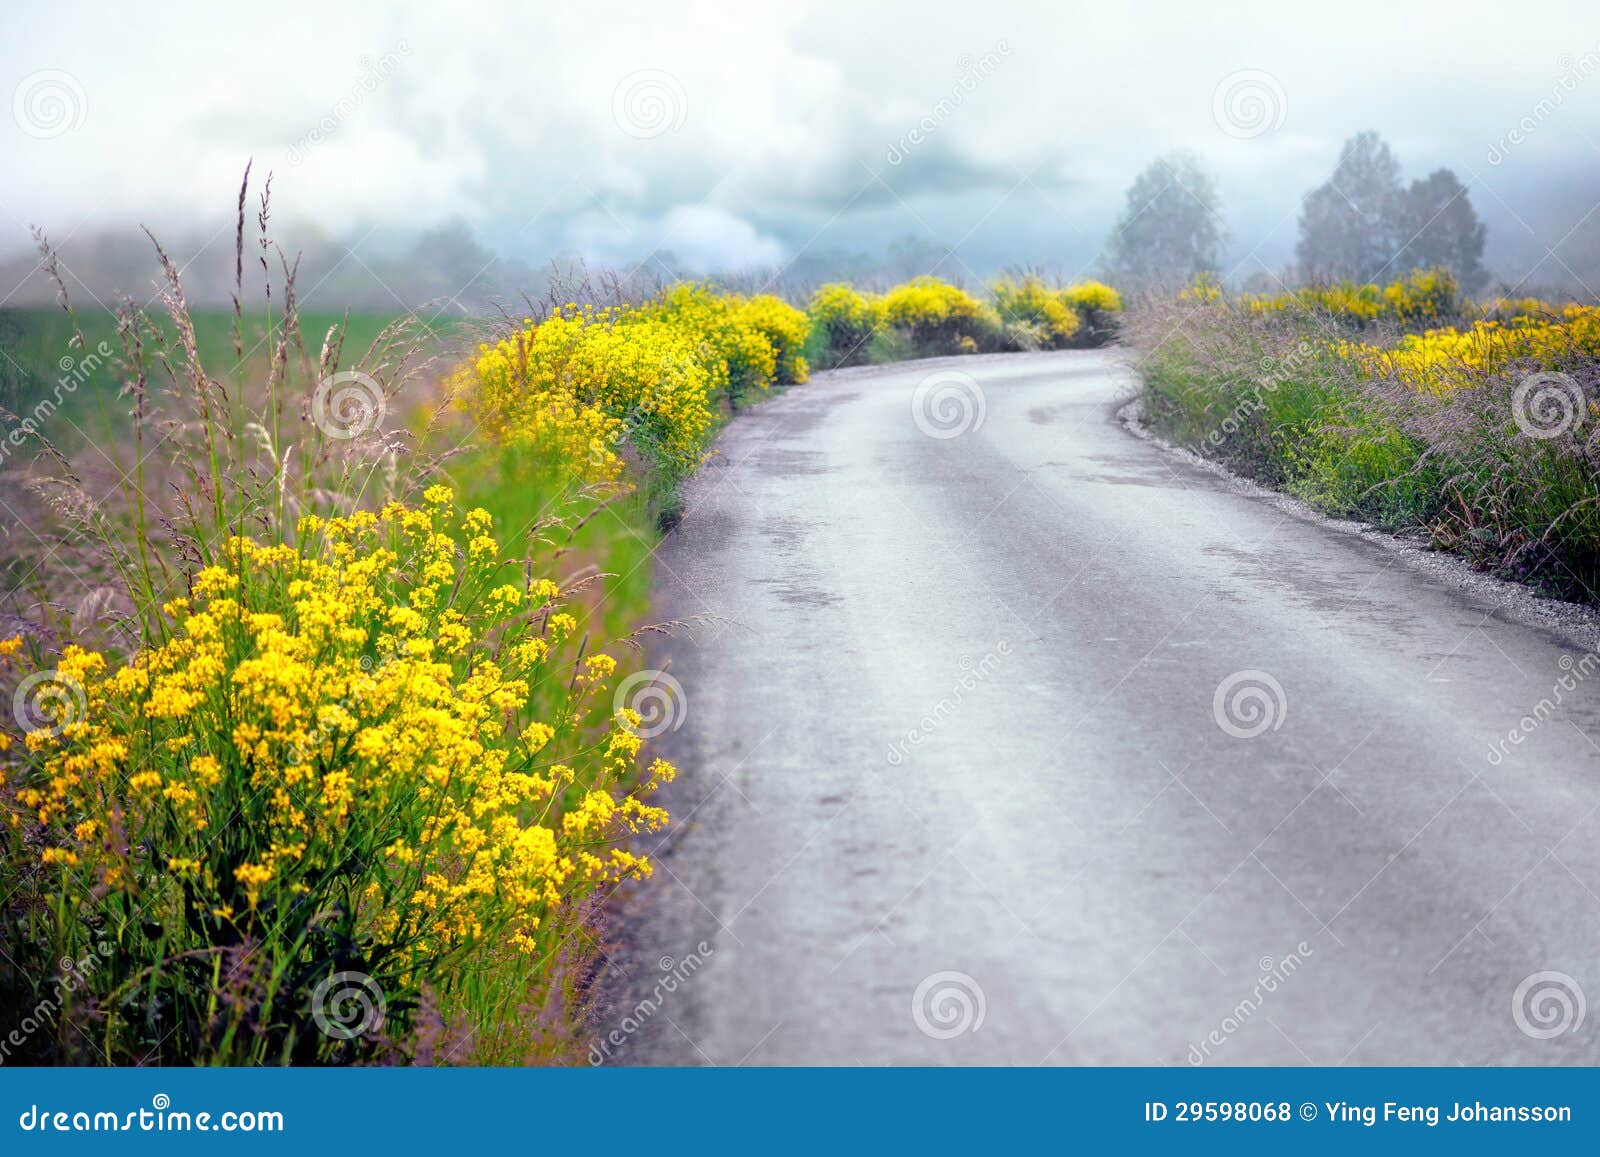 Country Road In Summer Stock Photo Image Of Country 29598068